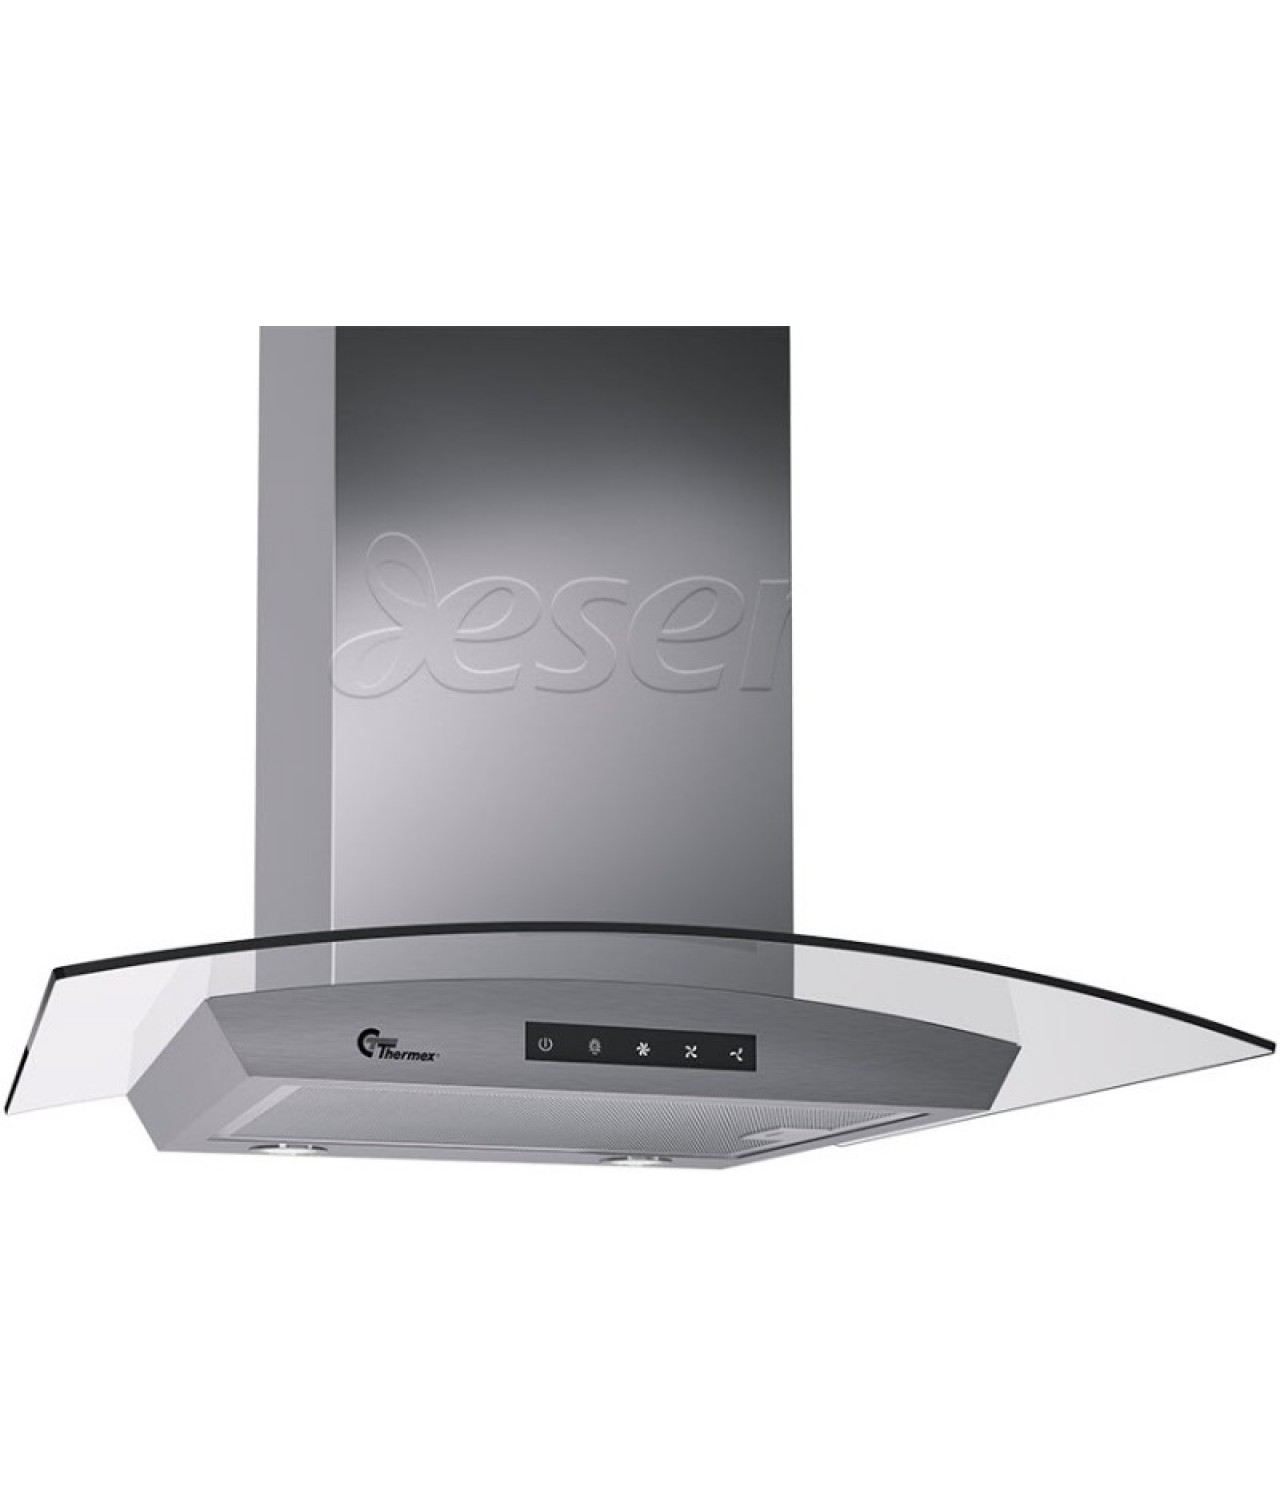 Wall mounted cooker hoods Derby glass-stainless steel